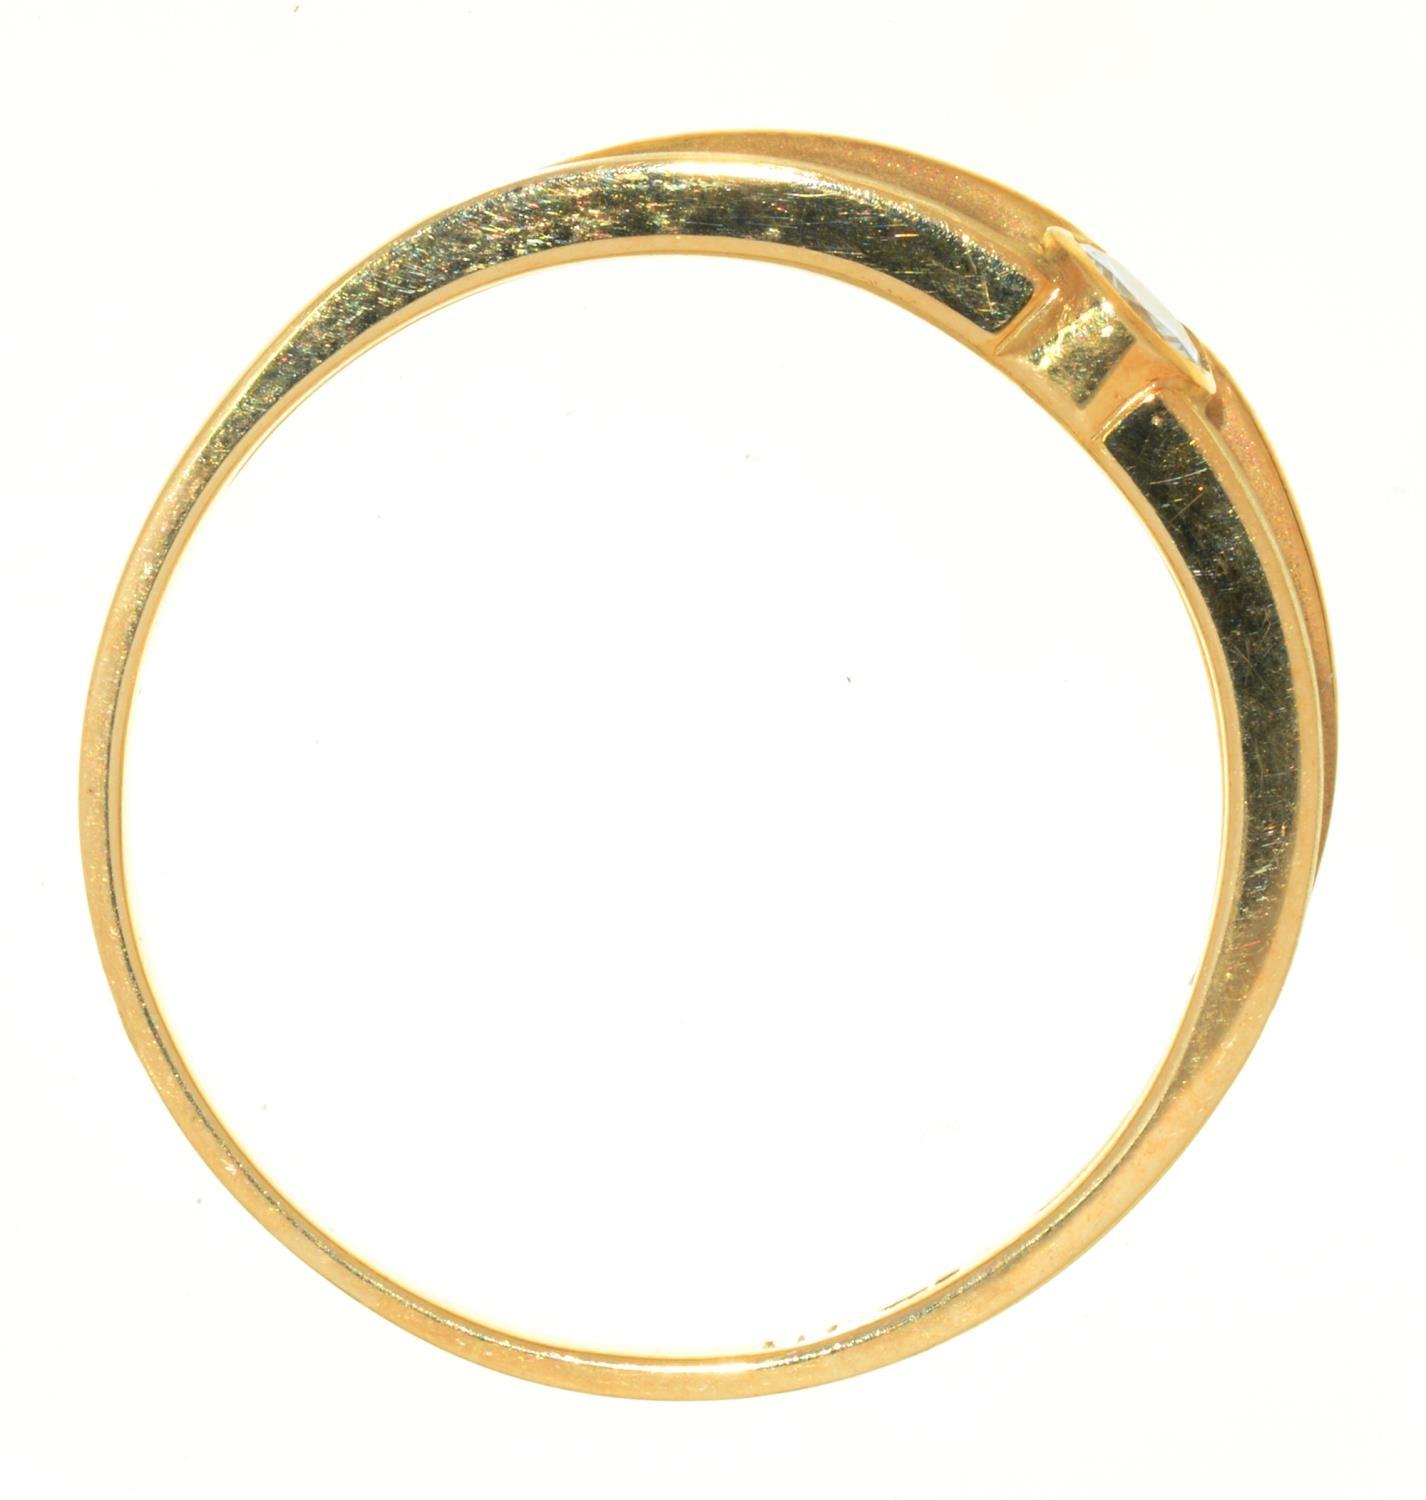 A DIAMOND SOLITAIRE RING IN GOLD MARKED 750, 4.5G, SIZE V½ - Image 2 of 2